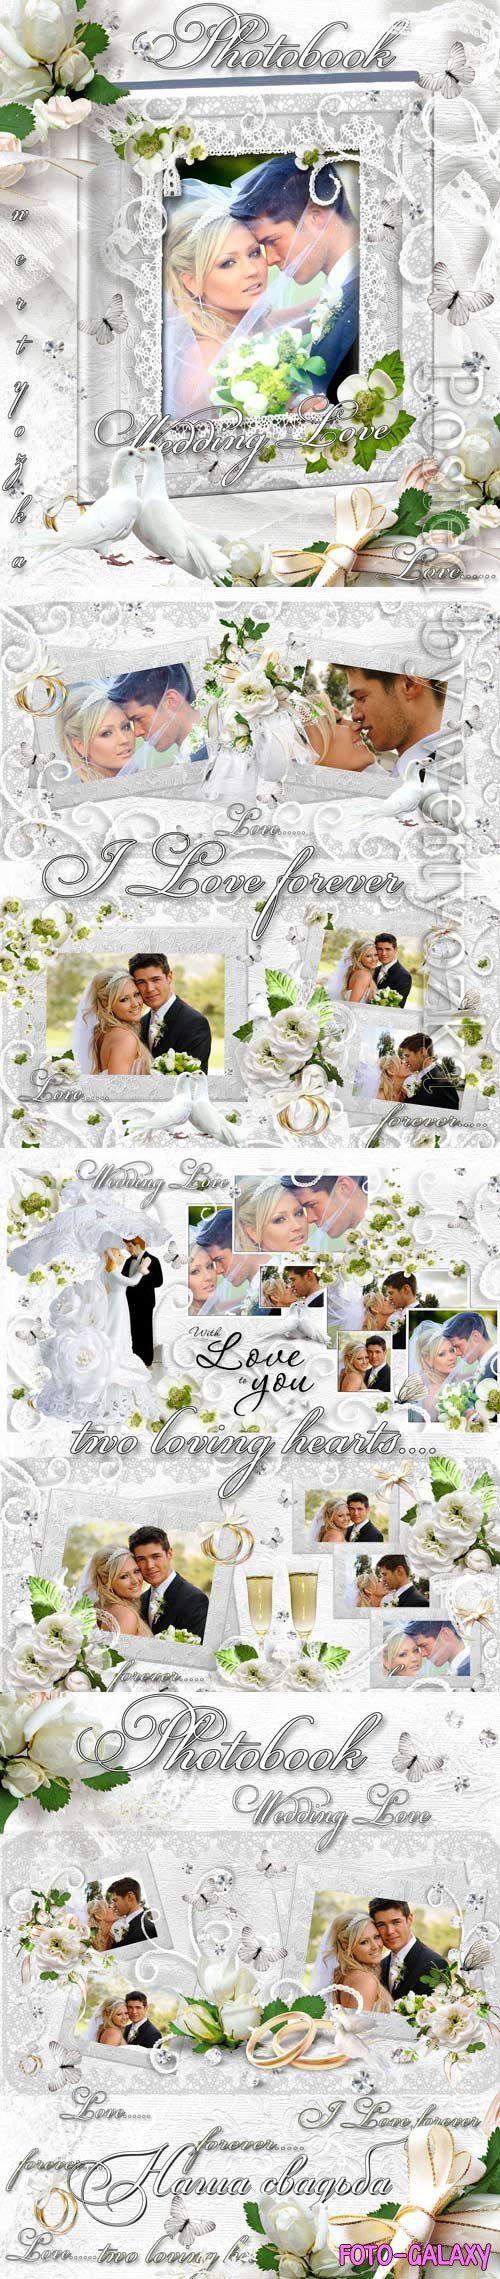 Wedding photo album with white flowers and doves